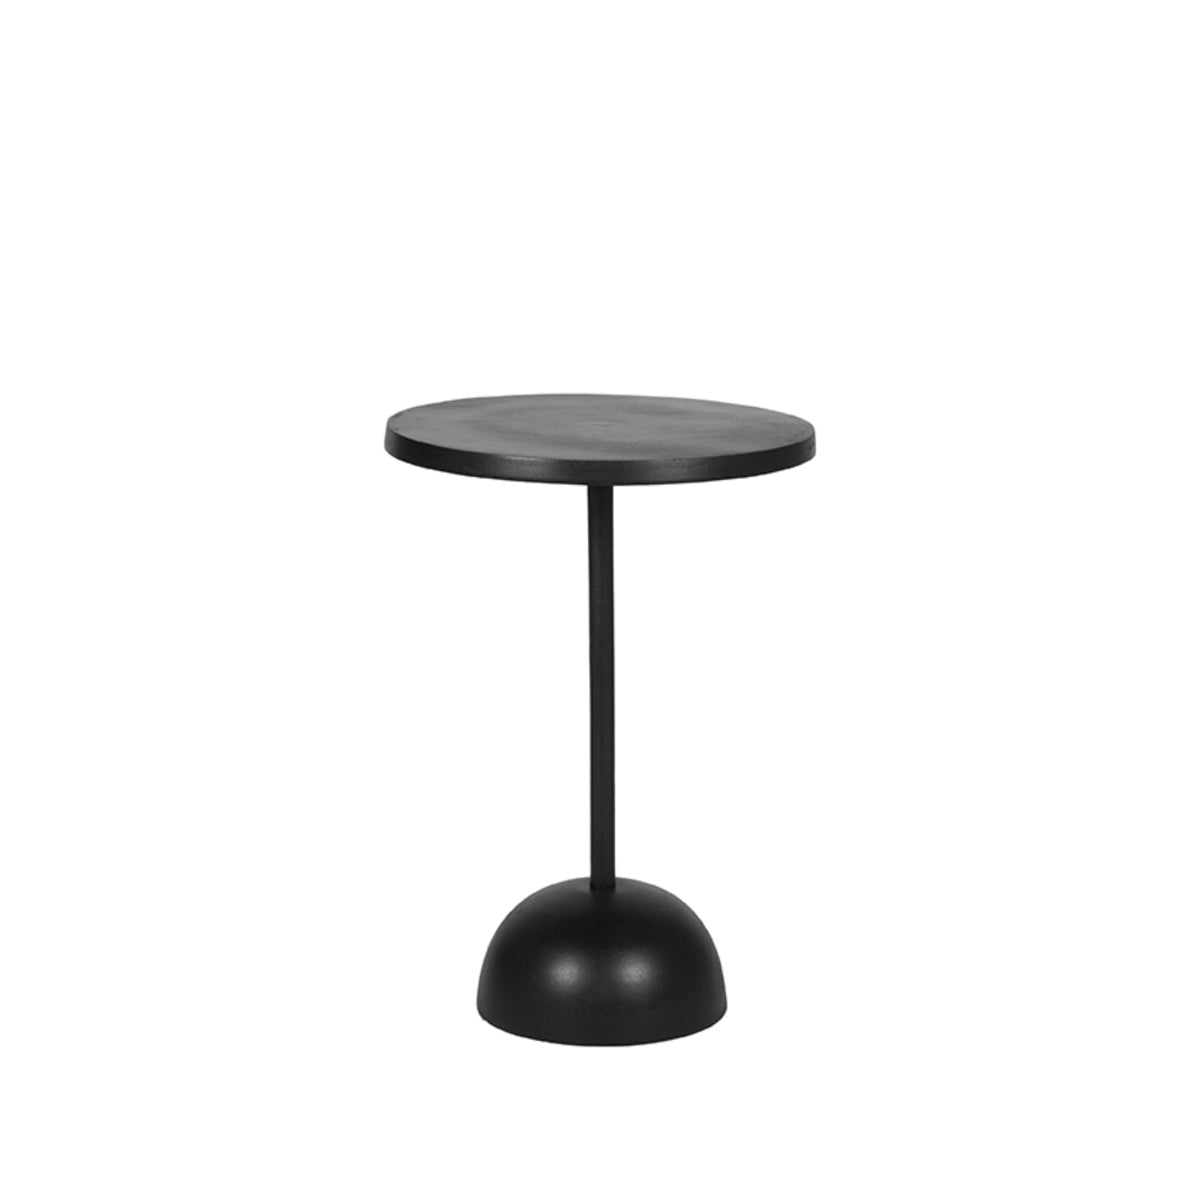 Nancy's Side Table Spark - Coffee table - Coffee table - Cocktail table - Side tables - Metal - Black - 40 x 40 x 57 cm